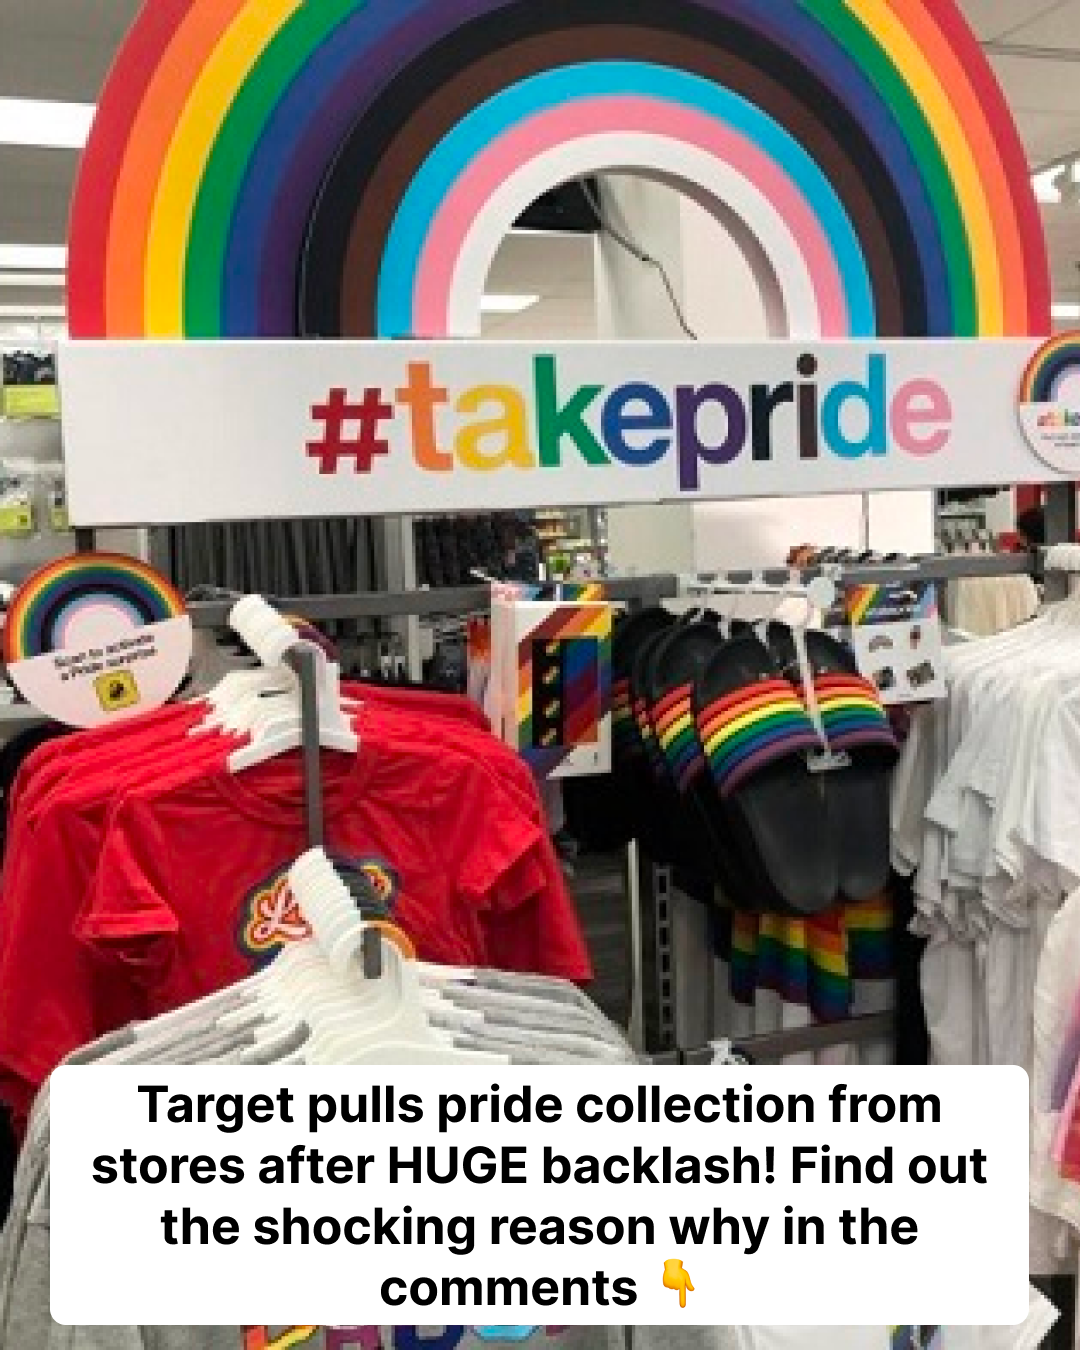 Target Announces Removal Of “Pride Collection” From “Most Stores” Due To Backlash